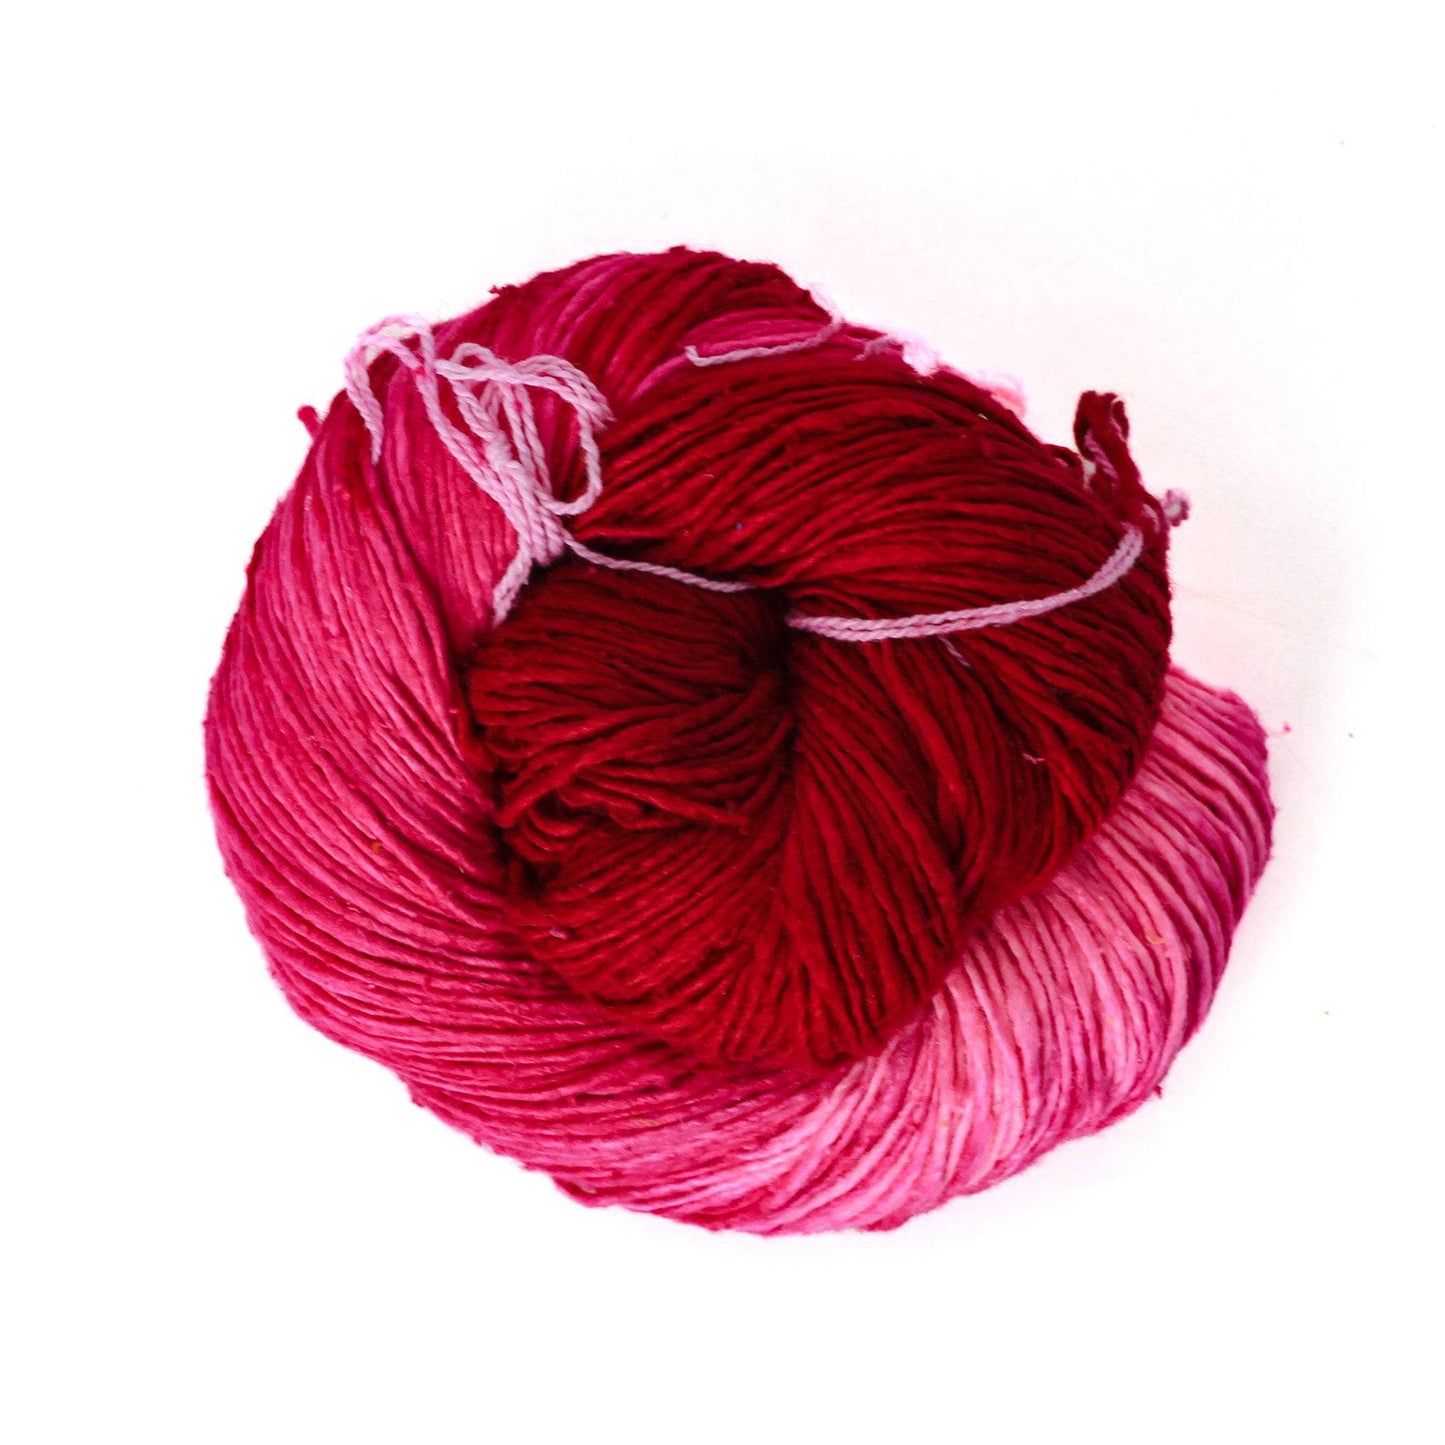 Ombre lace weight silk yarn pink in front of a white background.